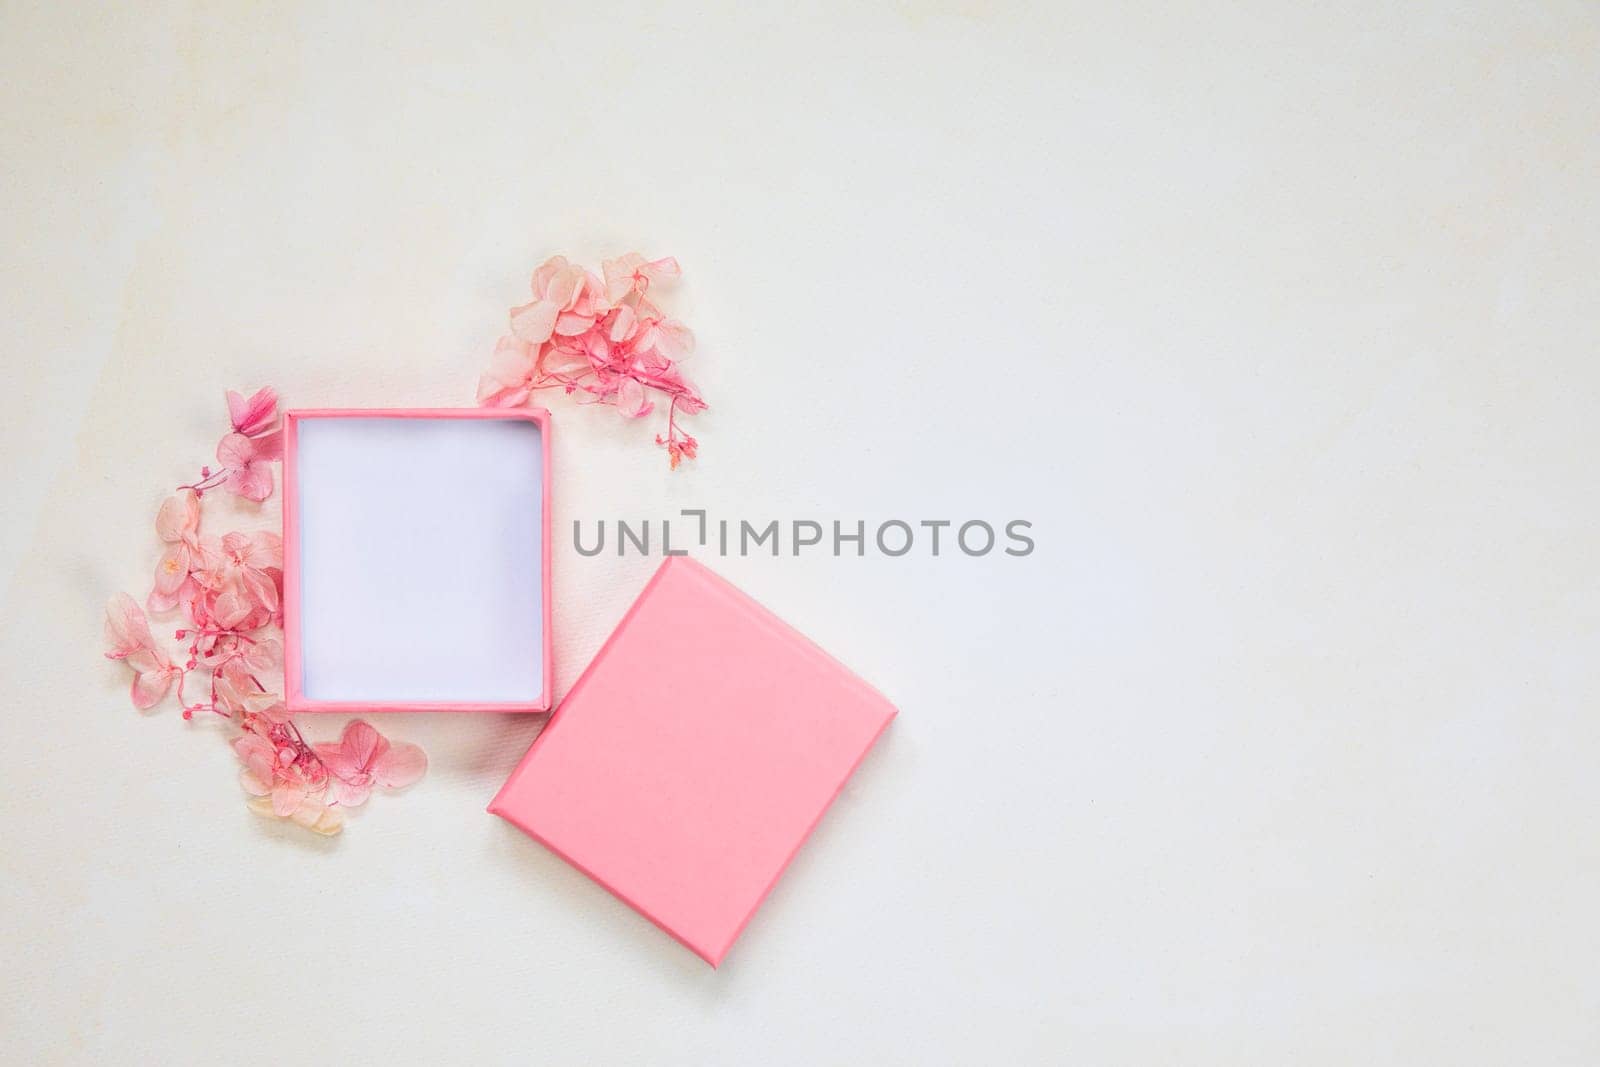 Open and closed pink gift box place for product on bright background with flowers .Flat lay, top view, mock-up gift,present Mothers Day,Valentines Day, Birthday concept by Annebel146